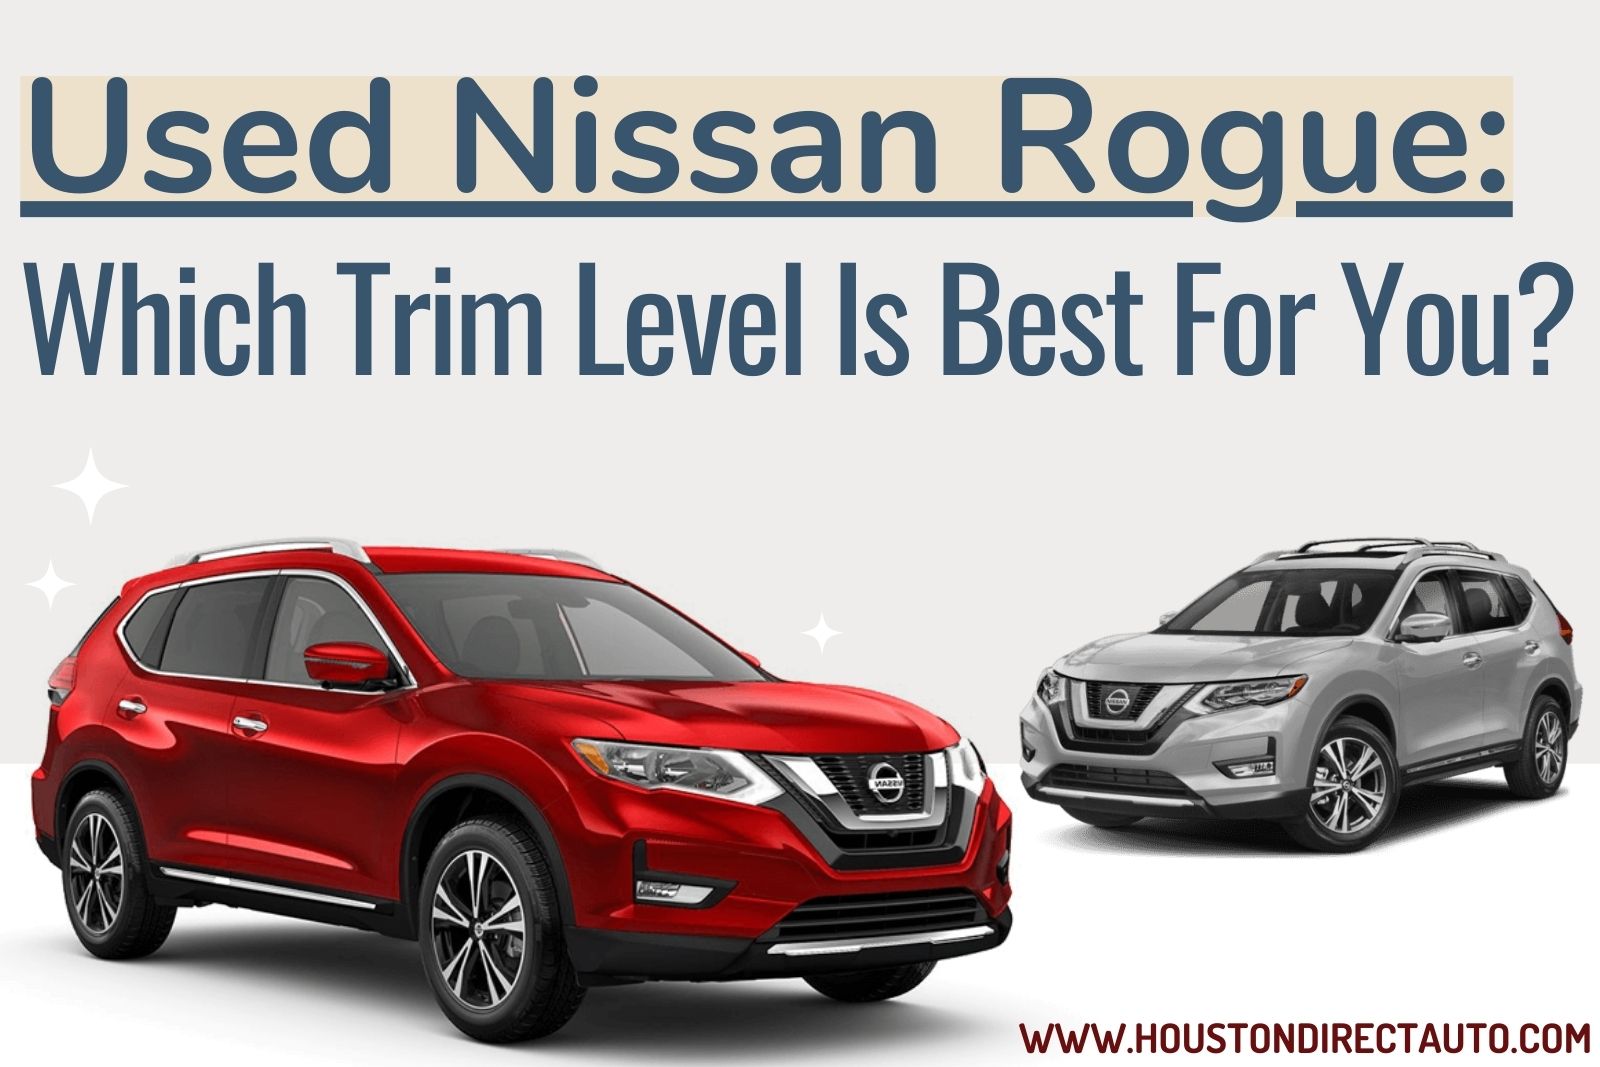 Nissan Cars For Sale Near Me In Houston TX, Used Nissan For Sale In Houston TX, Nissan Cars For Sale In Houston TX, Nissan Used Cars In Houston TX